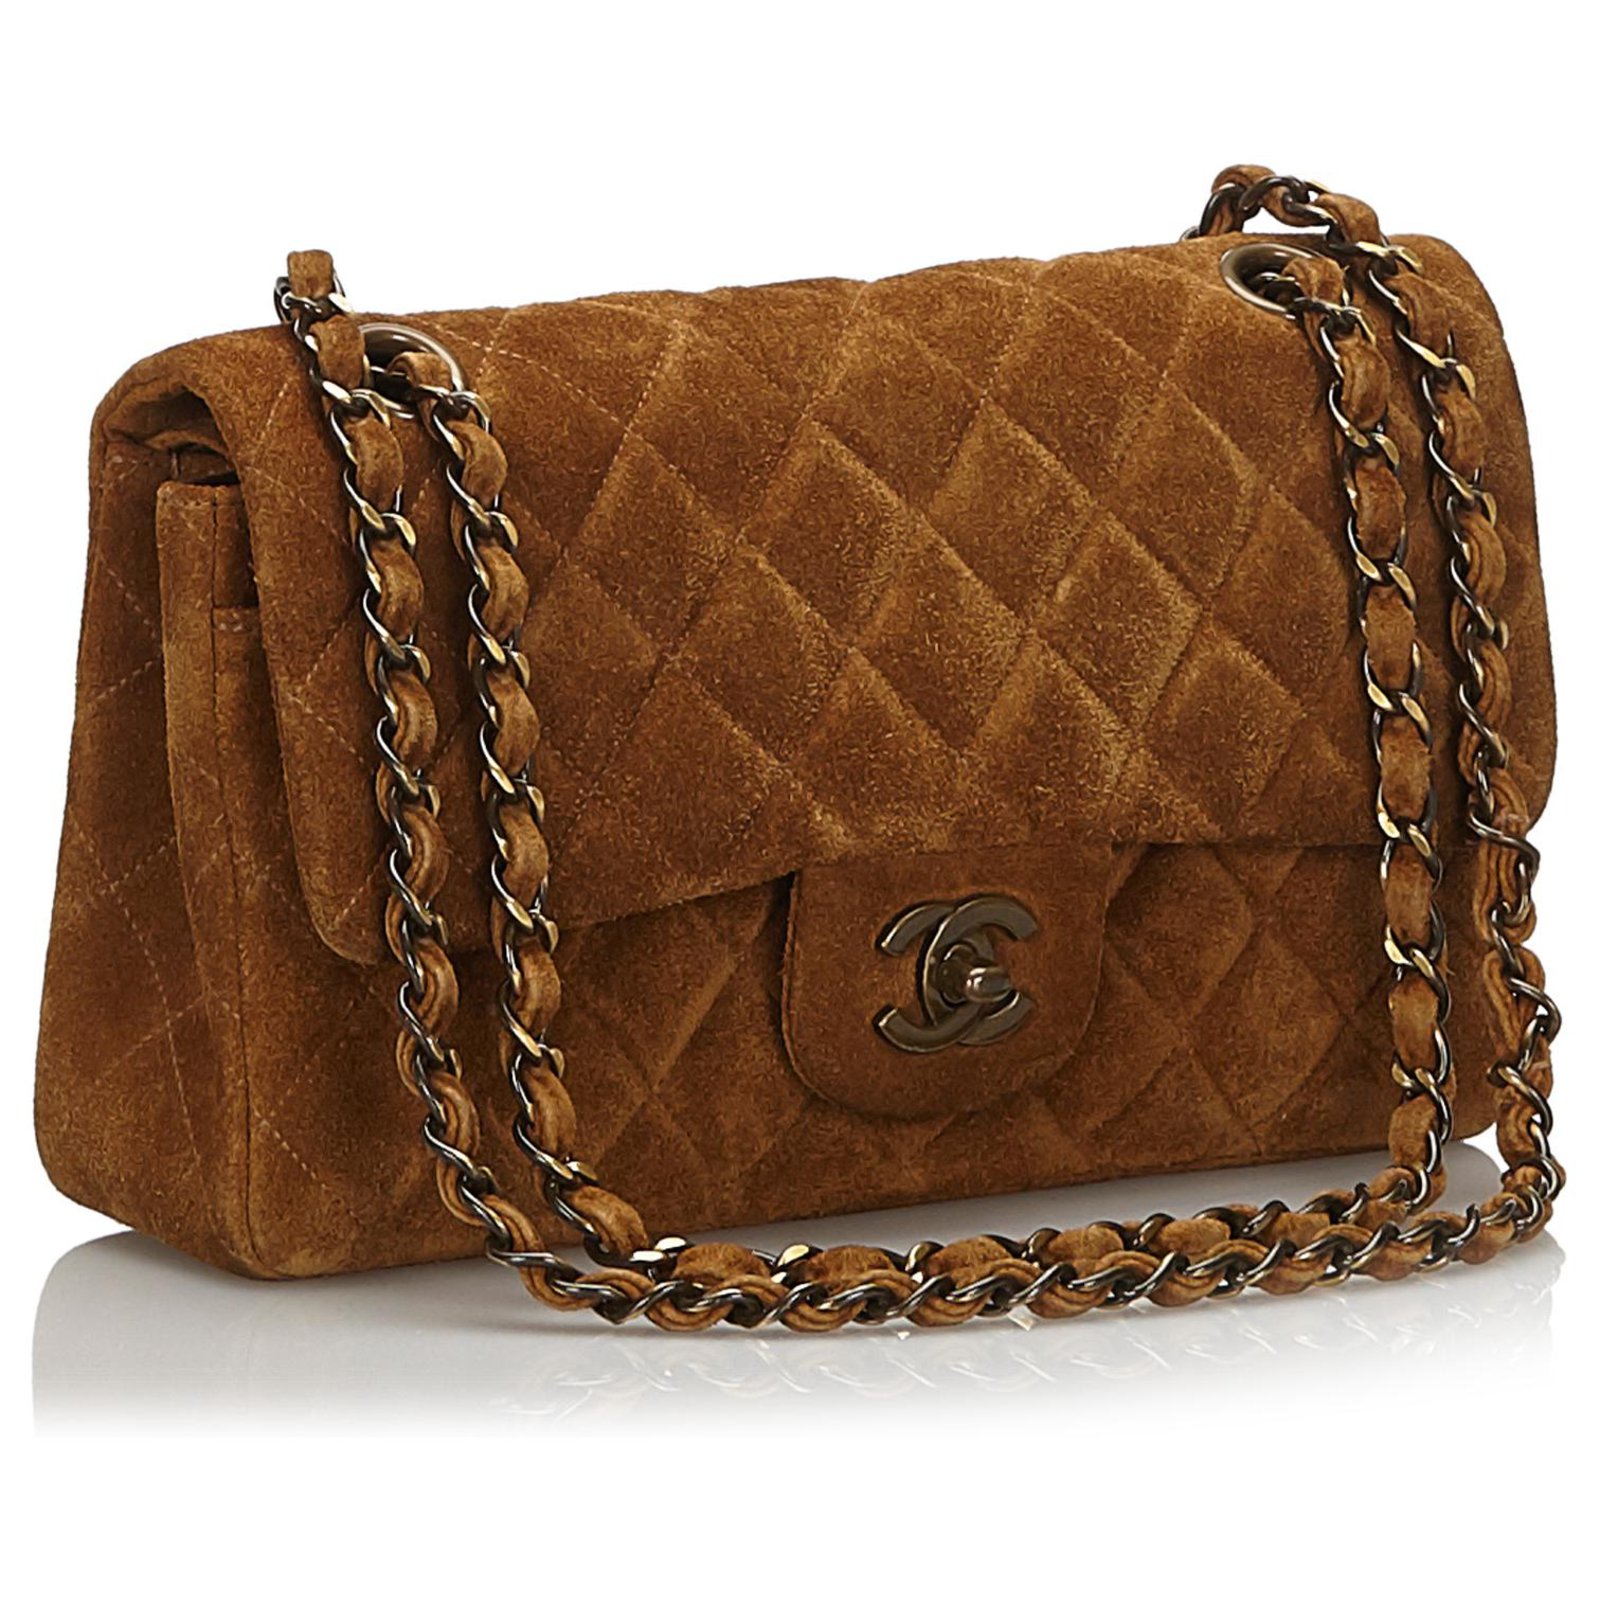 Chanel Classic Flap Large Jumbo Quilted Saddle Brown Nubuck